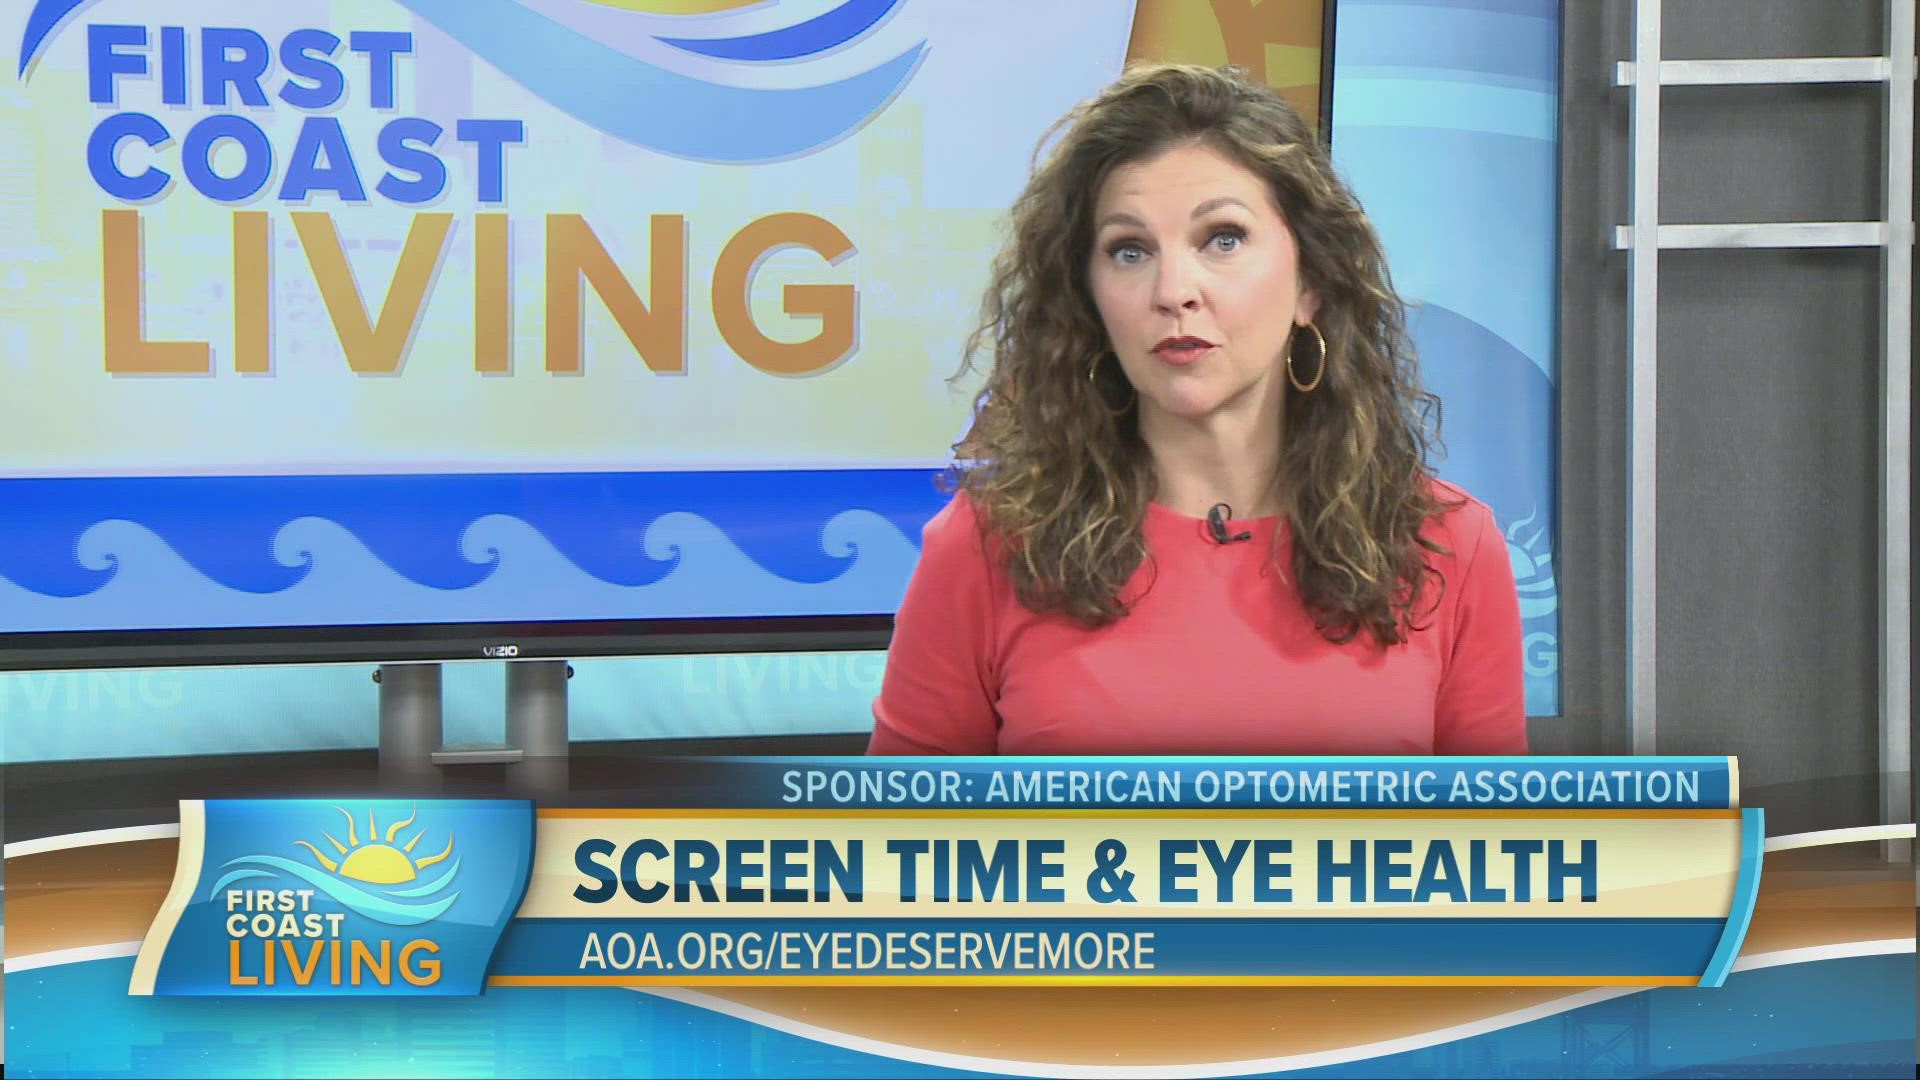 American Optometric Association member and gamer, Dr. Jason Compton shares details on a new screen time alliance headed by the AOA.